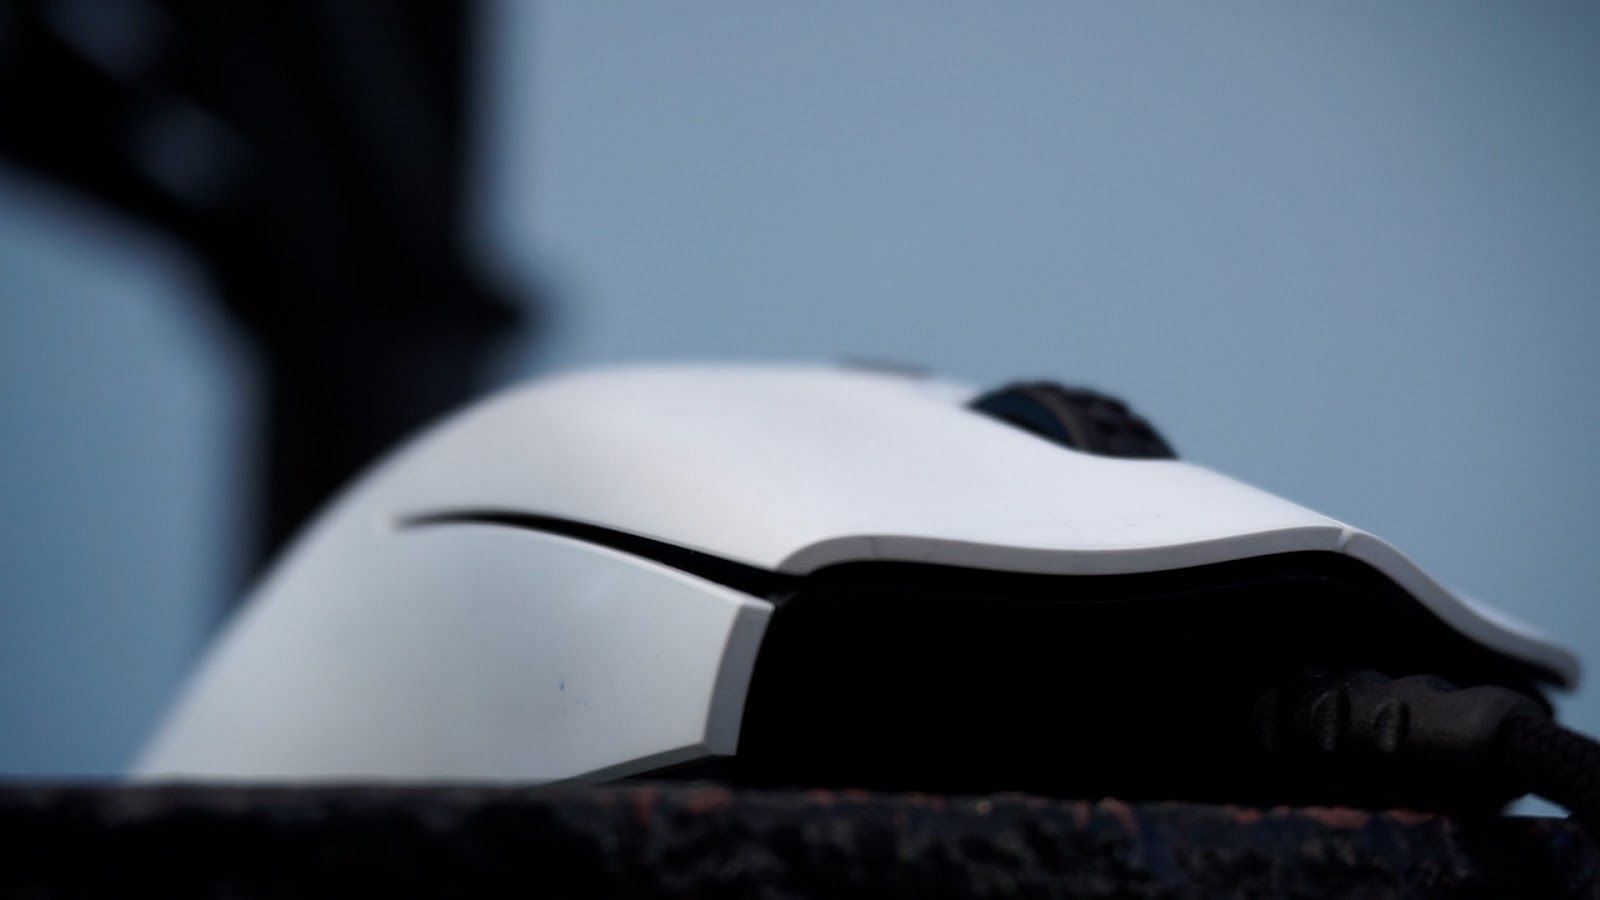 The shape of the NZXT Lift mouse (Image via Sportskeeda)